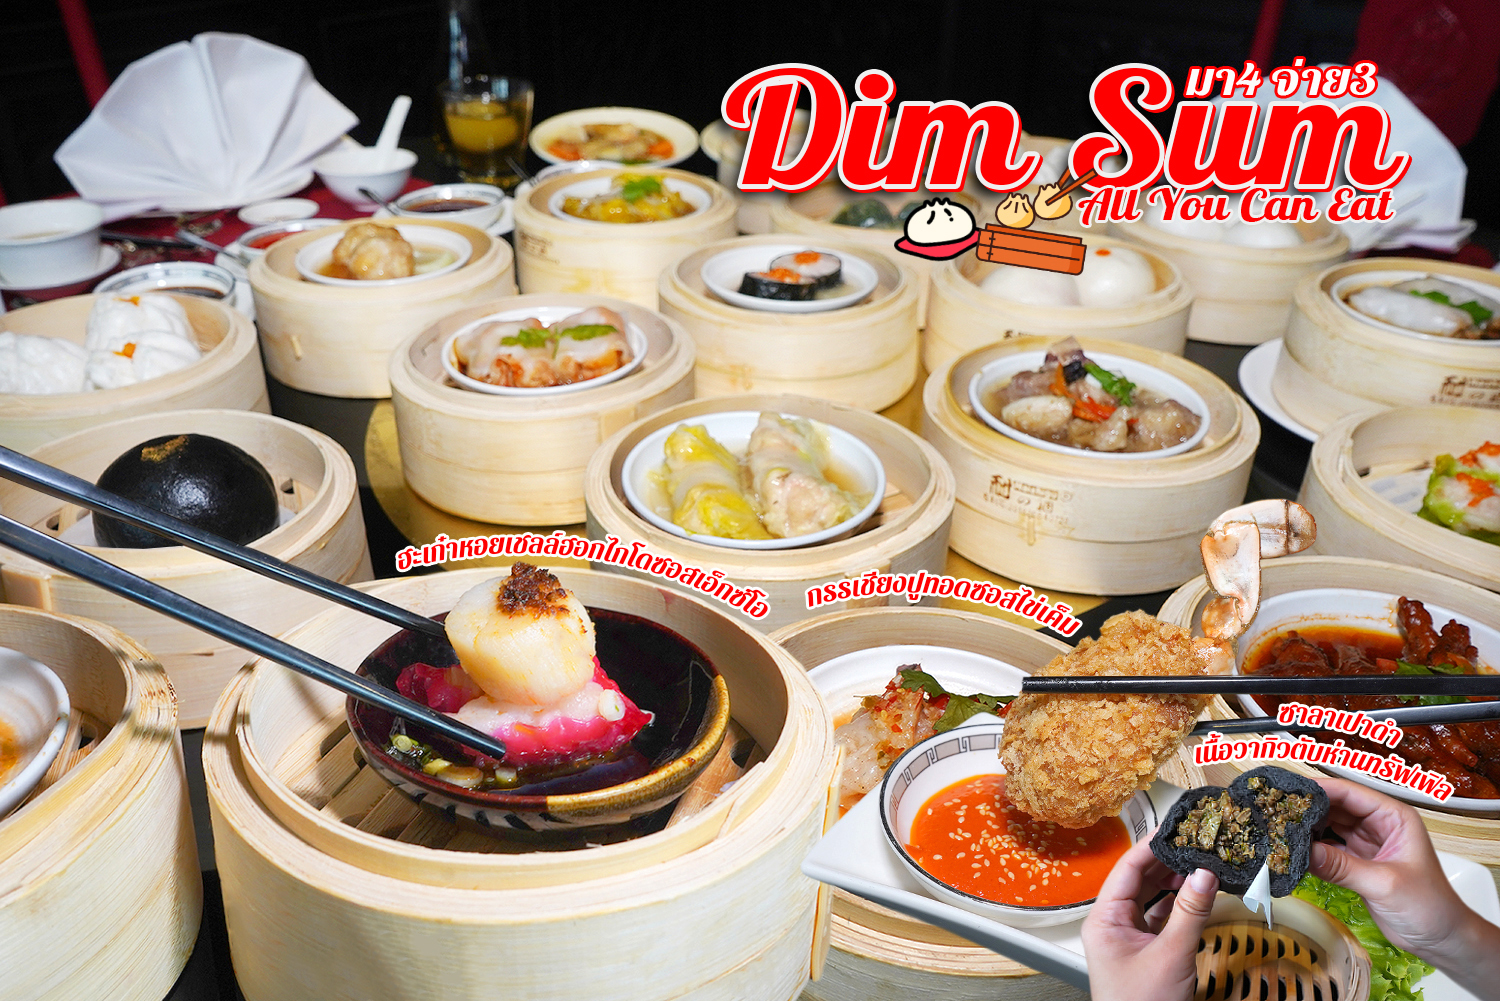 Sui Sian Chinese Restaurant Dim Sum All You Can Eat with Premium Dish 0